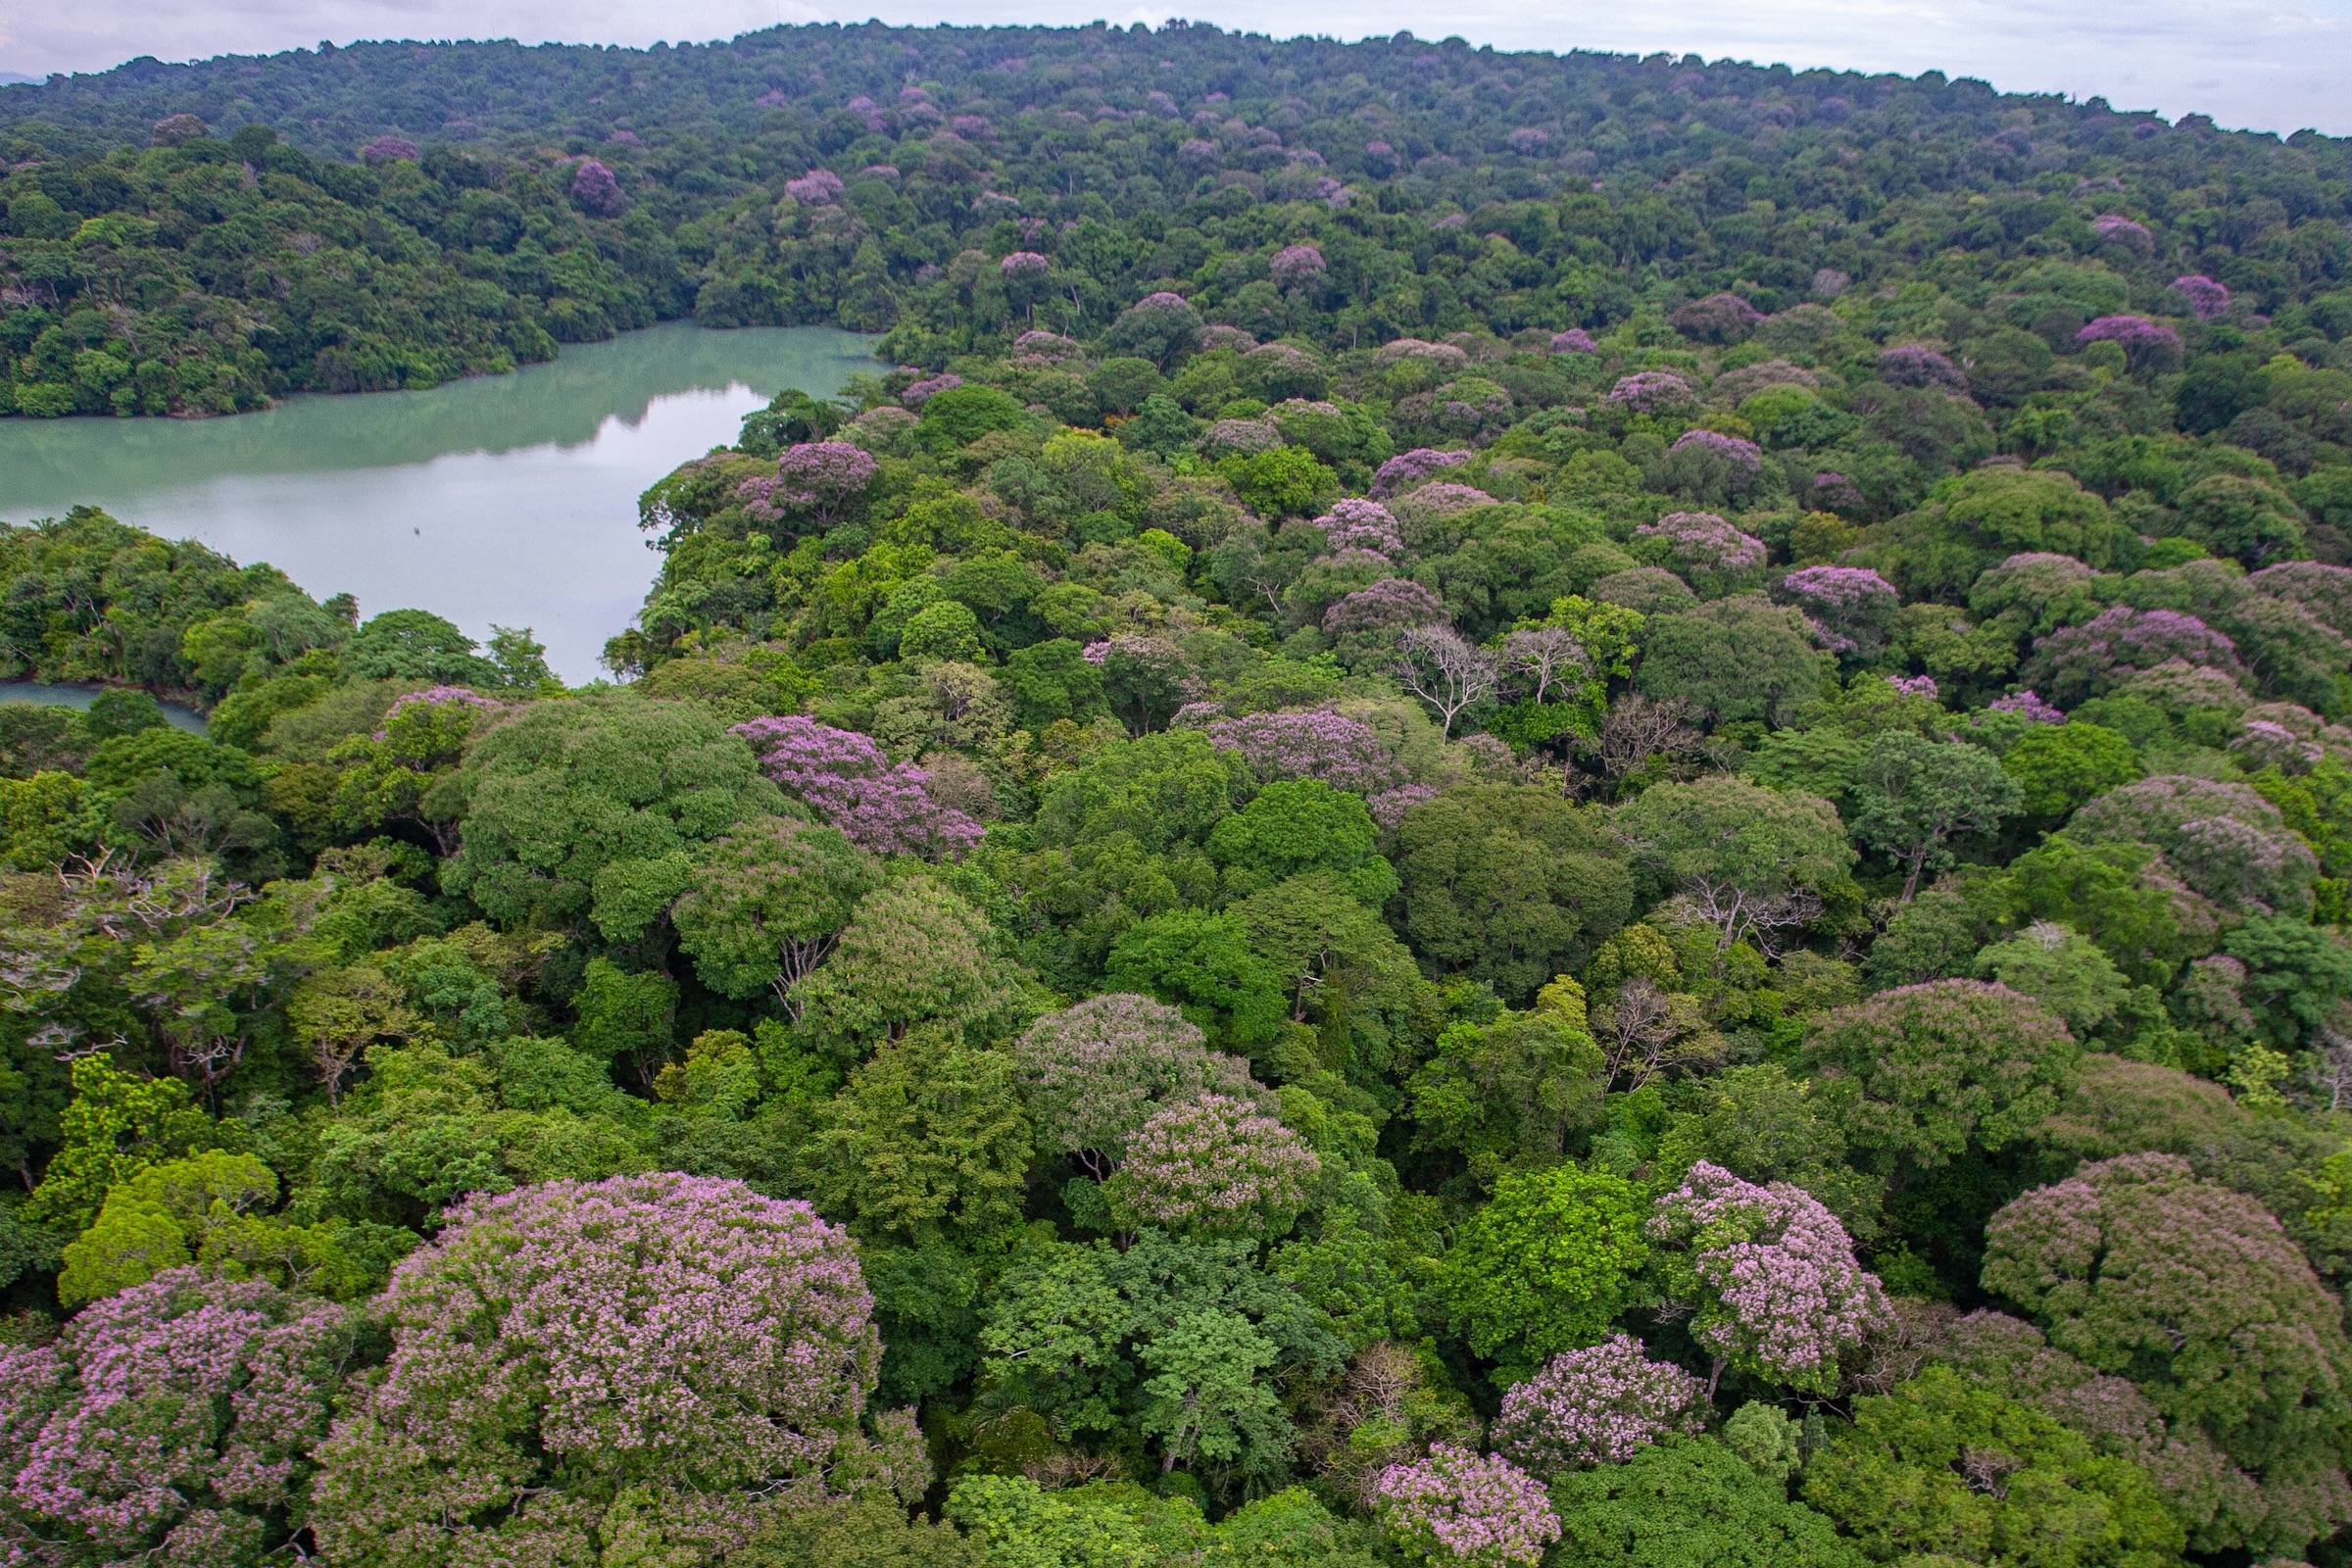 An aerial shot of a forest shows species of trees clustered together near a river